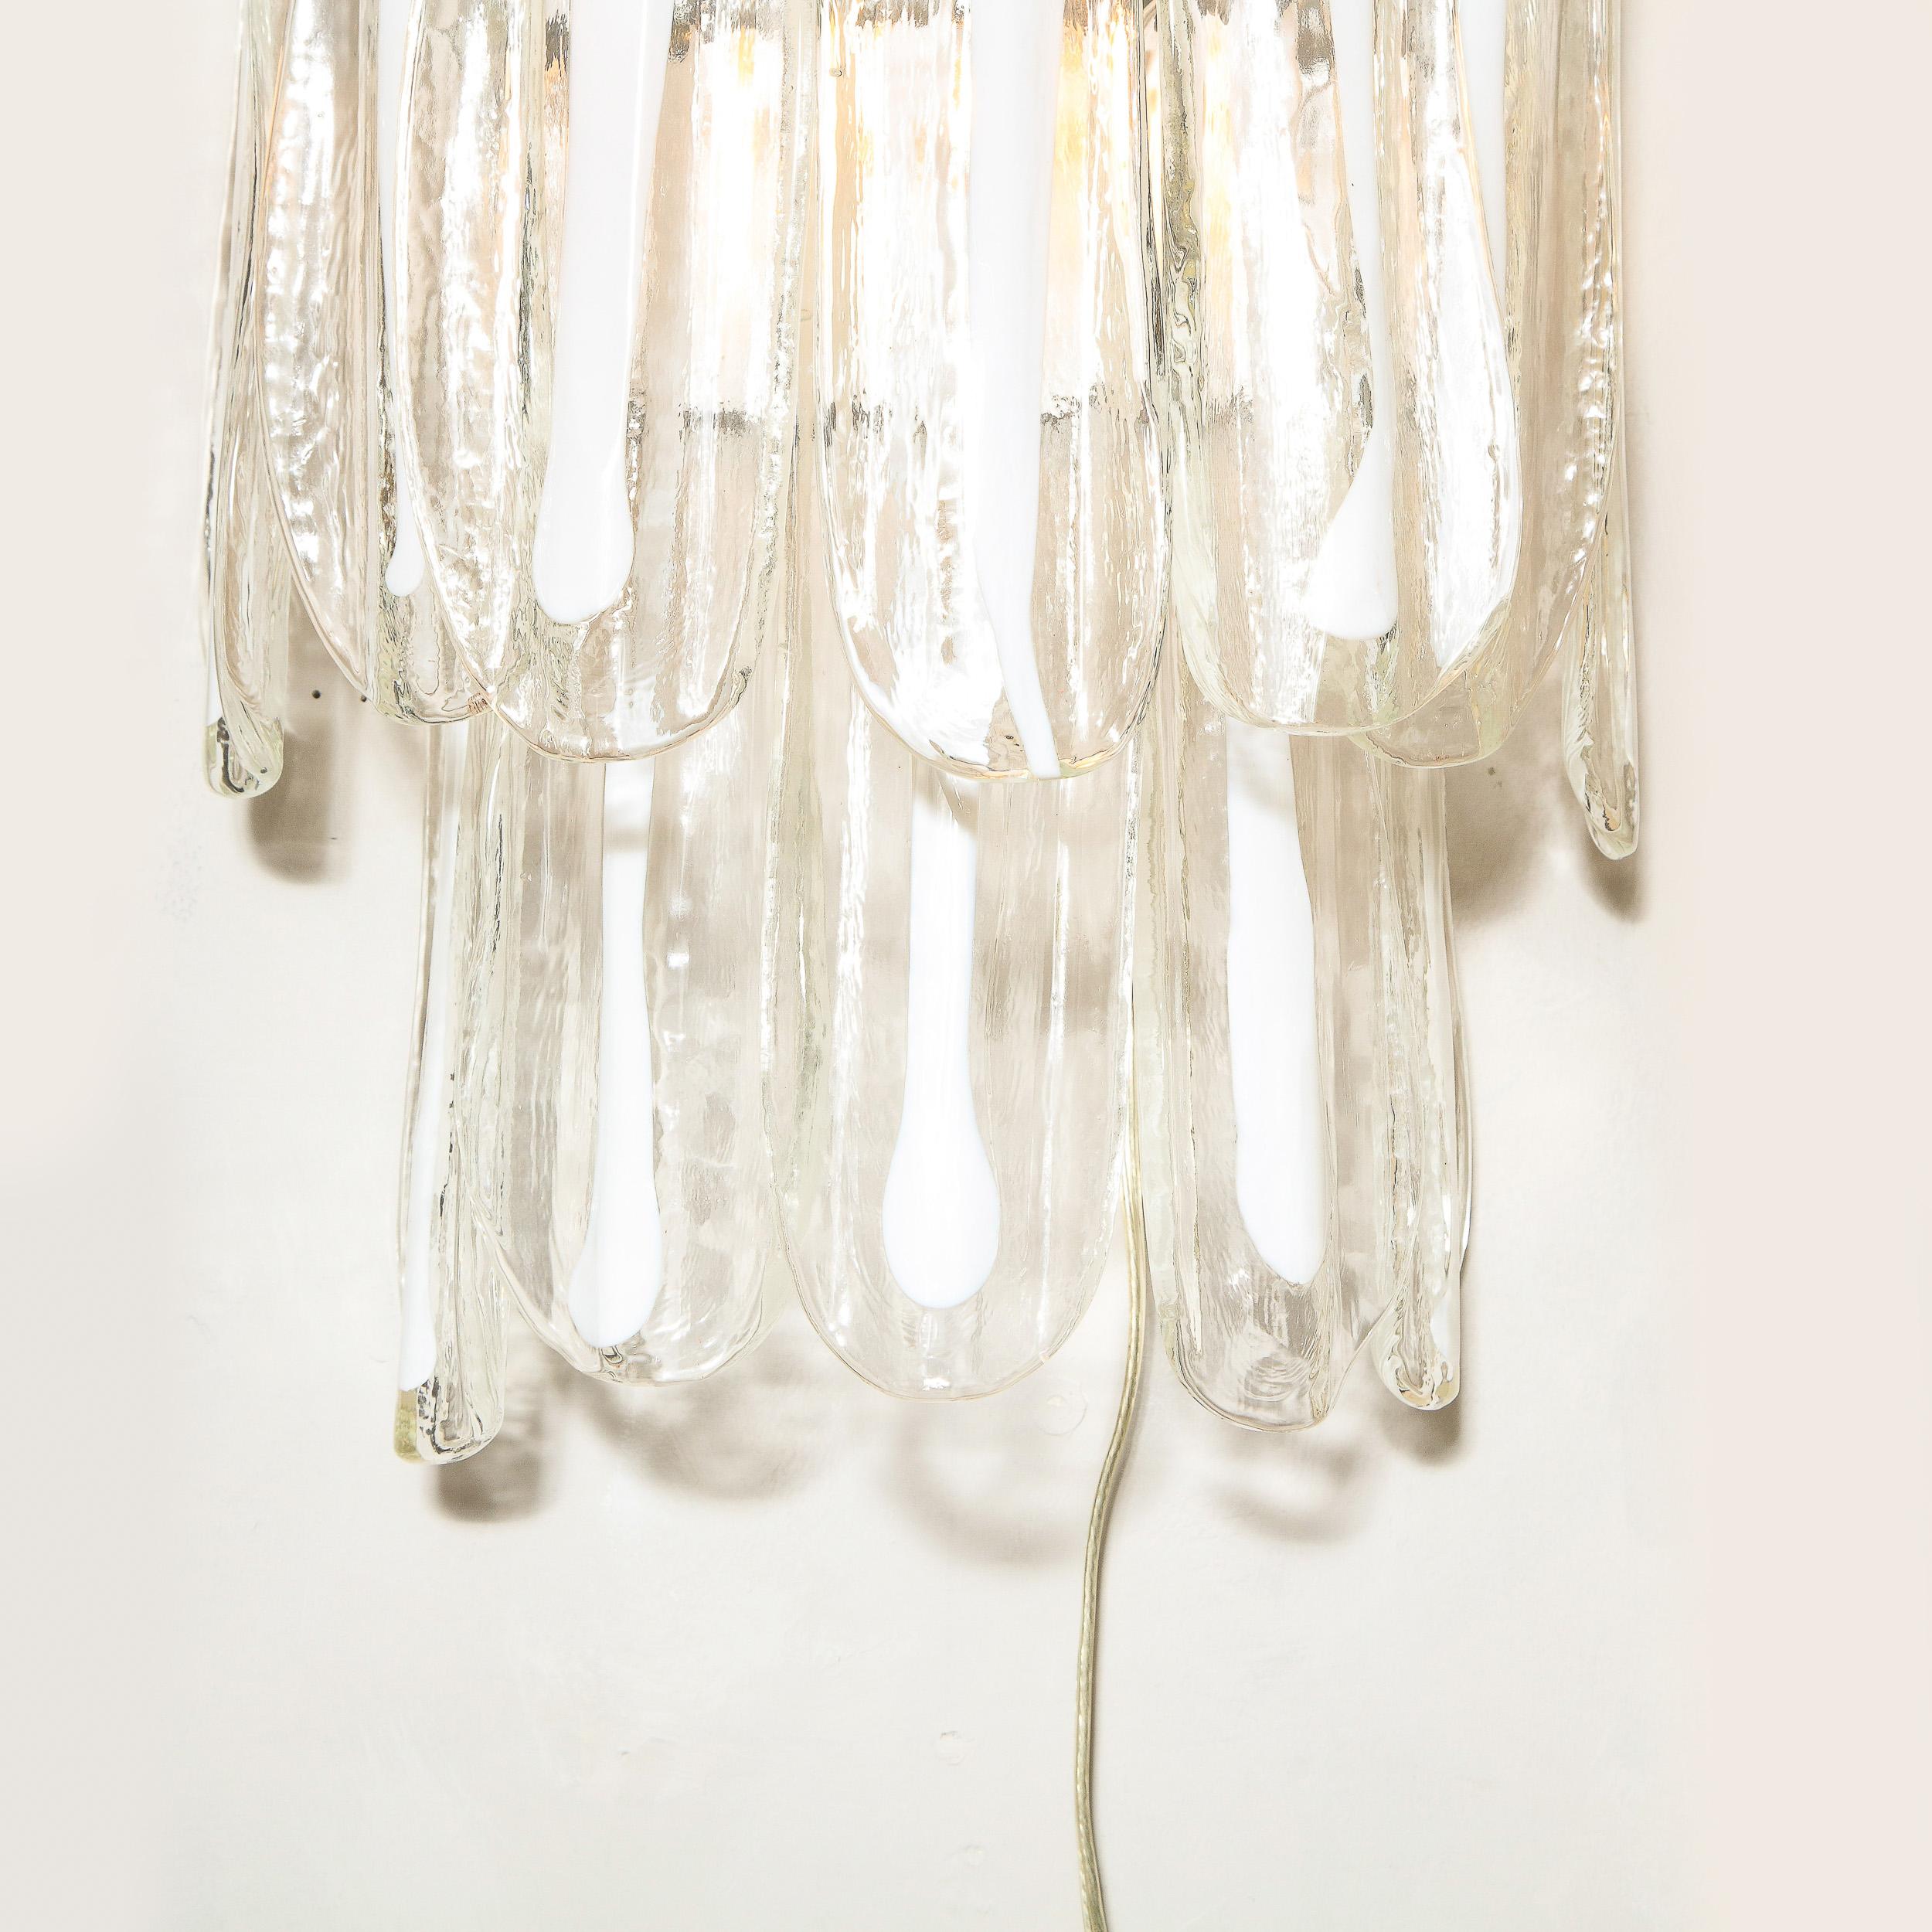 Pair of Mid-Century Modern Translucent & White Murano Glass Sconces by Mazzega For Sale 12